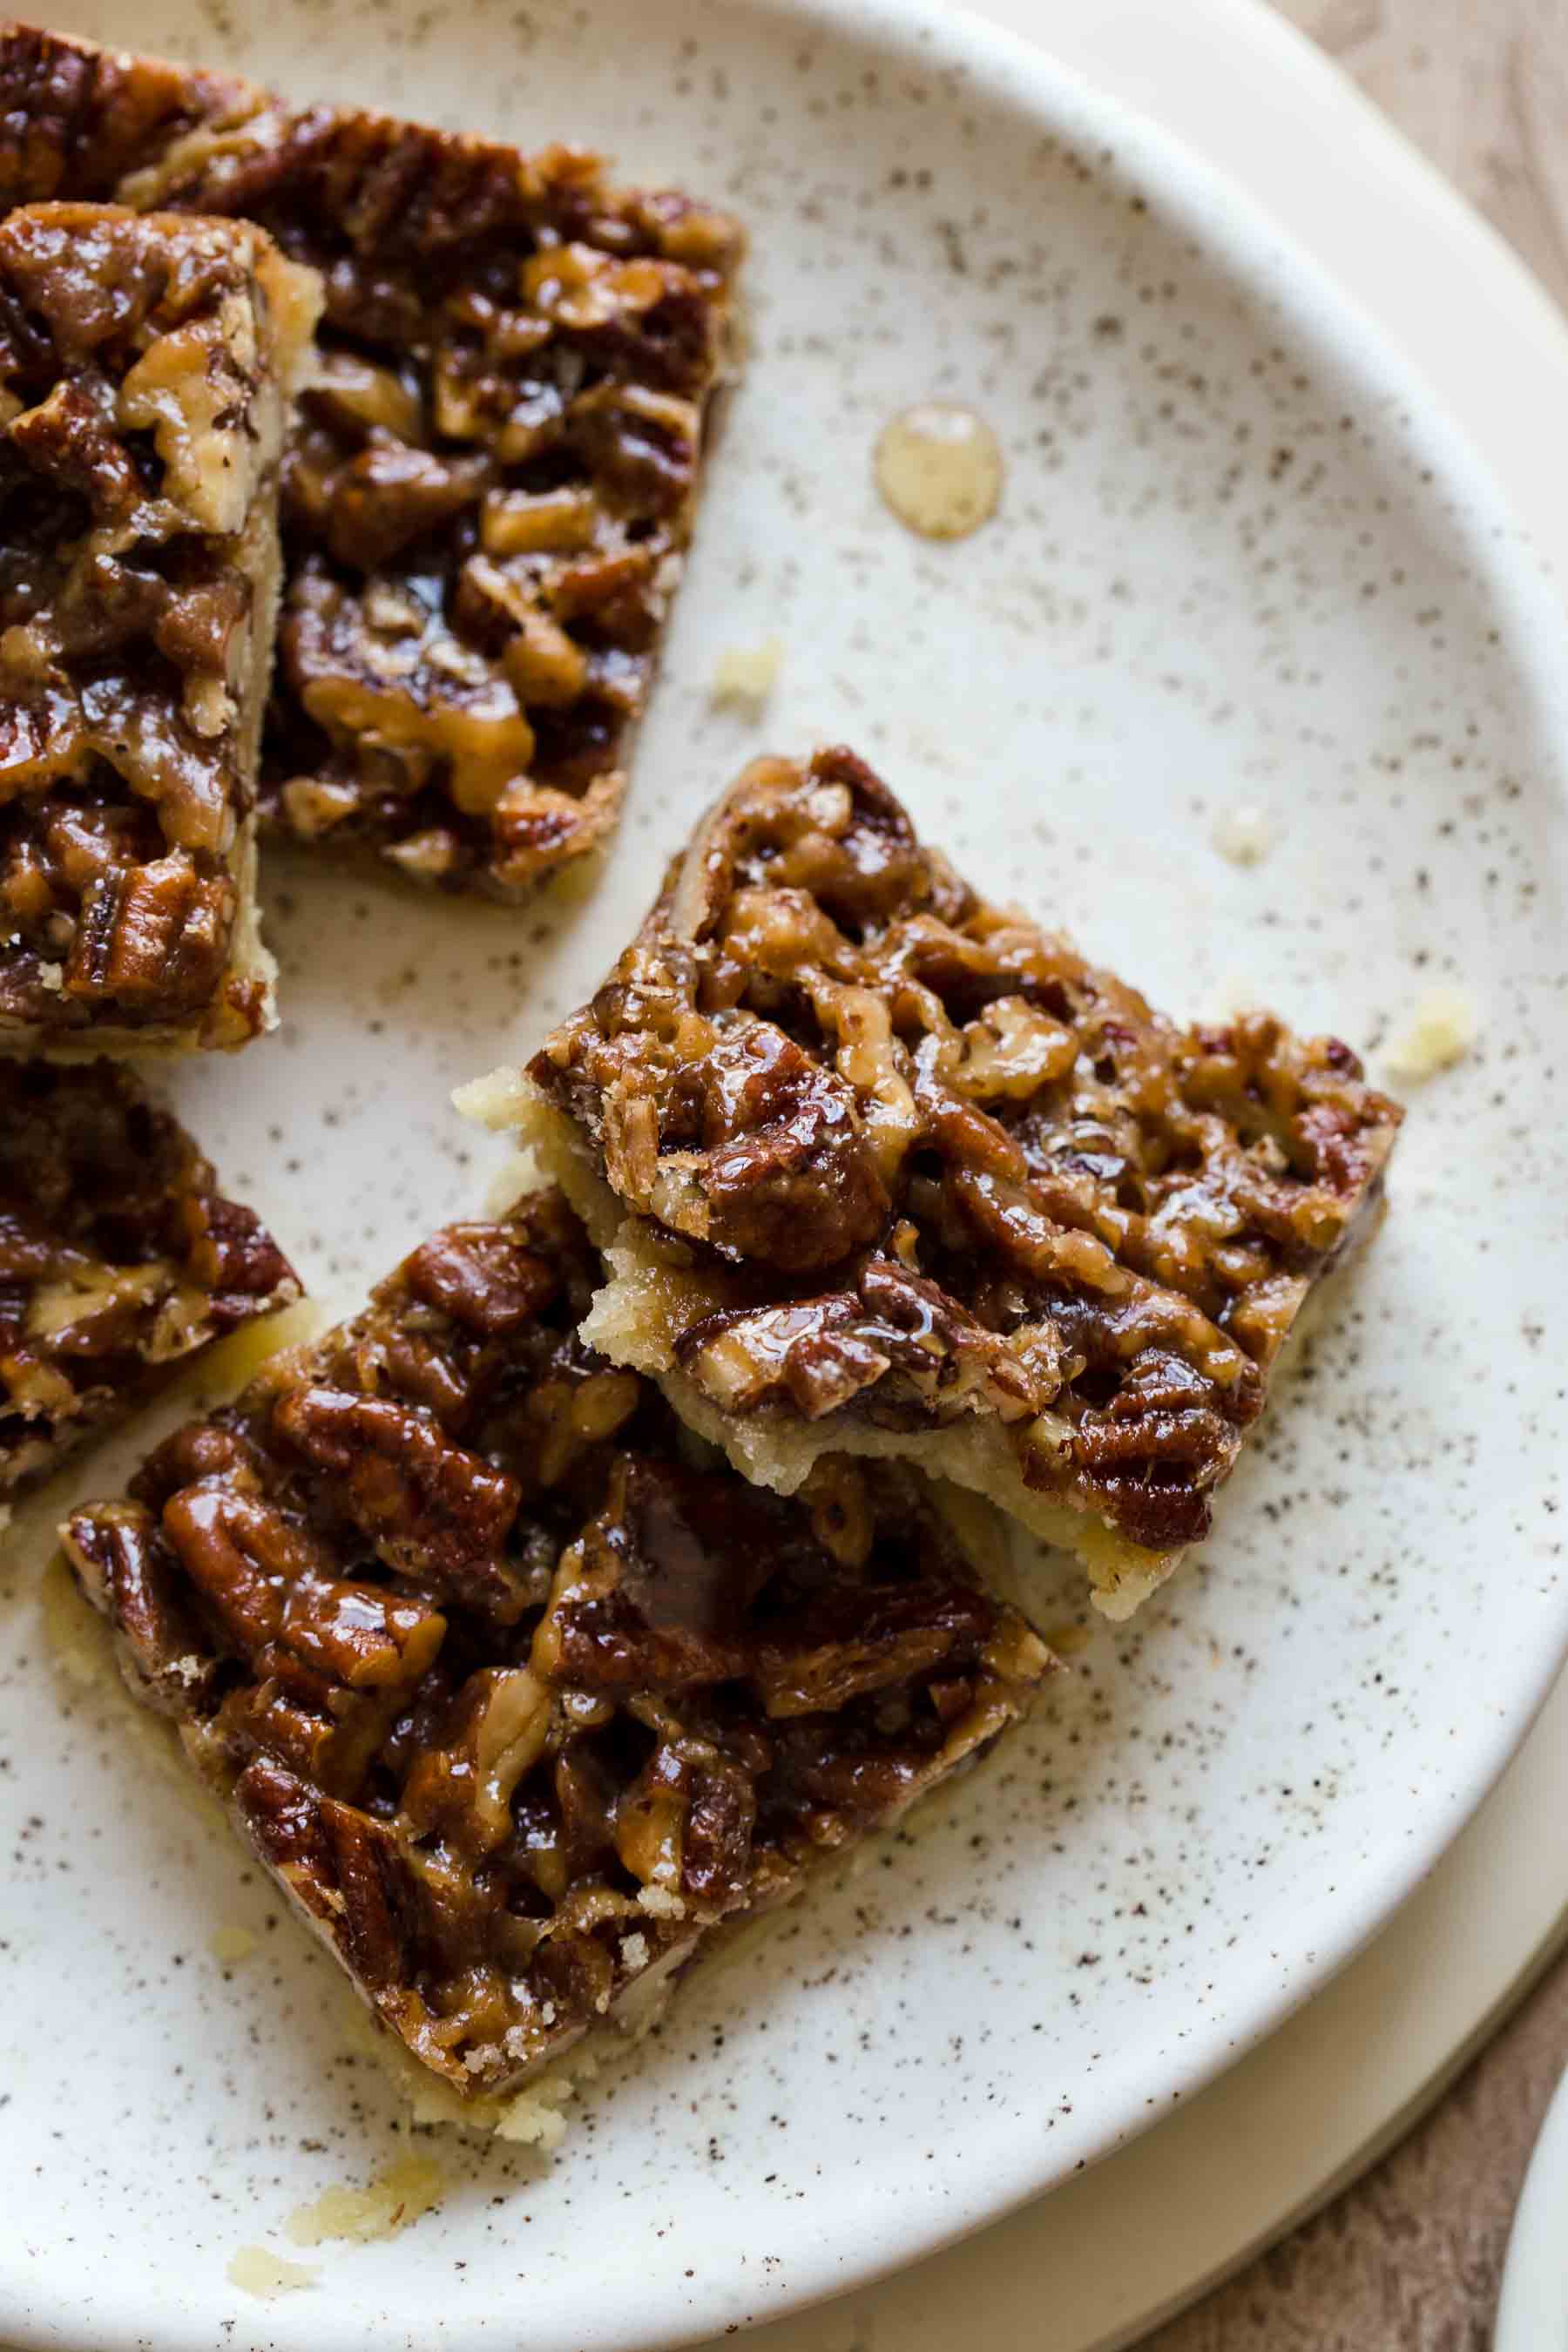 To Die For Pecan Pie Shortbread Bars Recipe Also The Crumbs Please,Curdled Milk In Tea